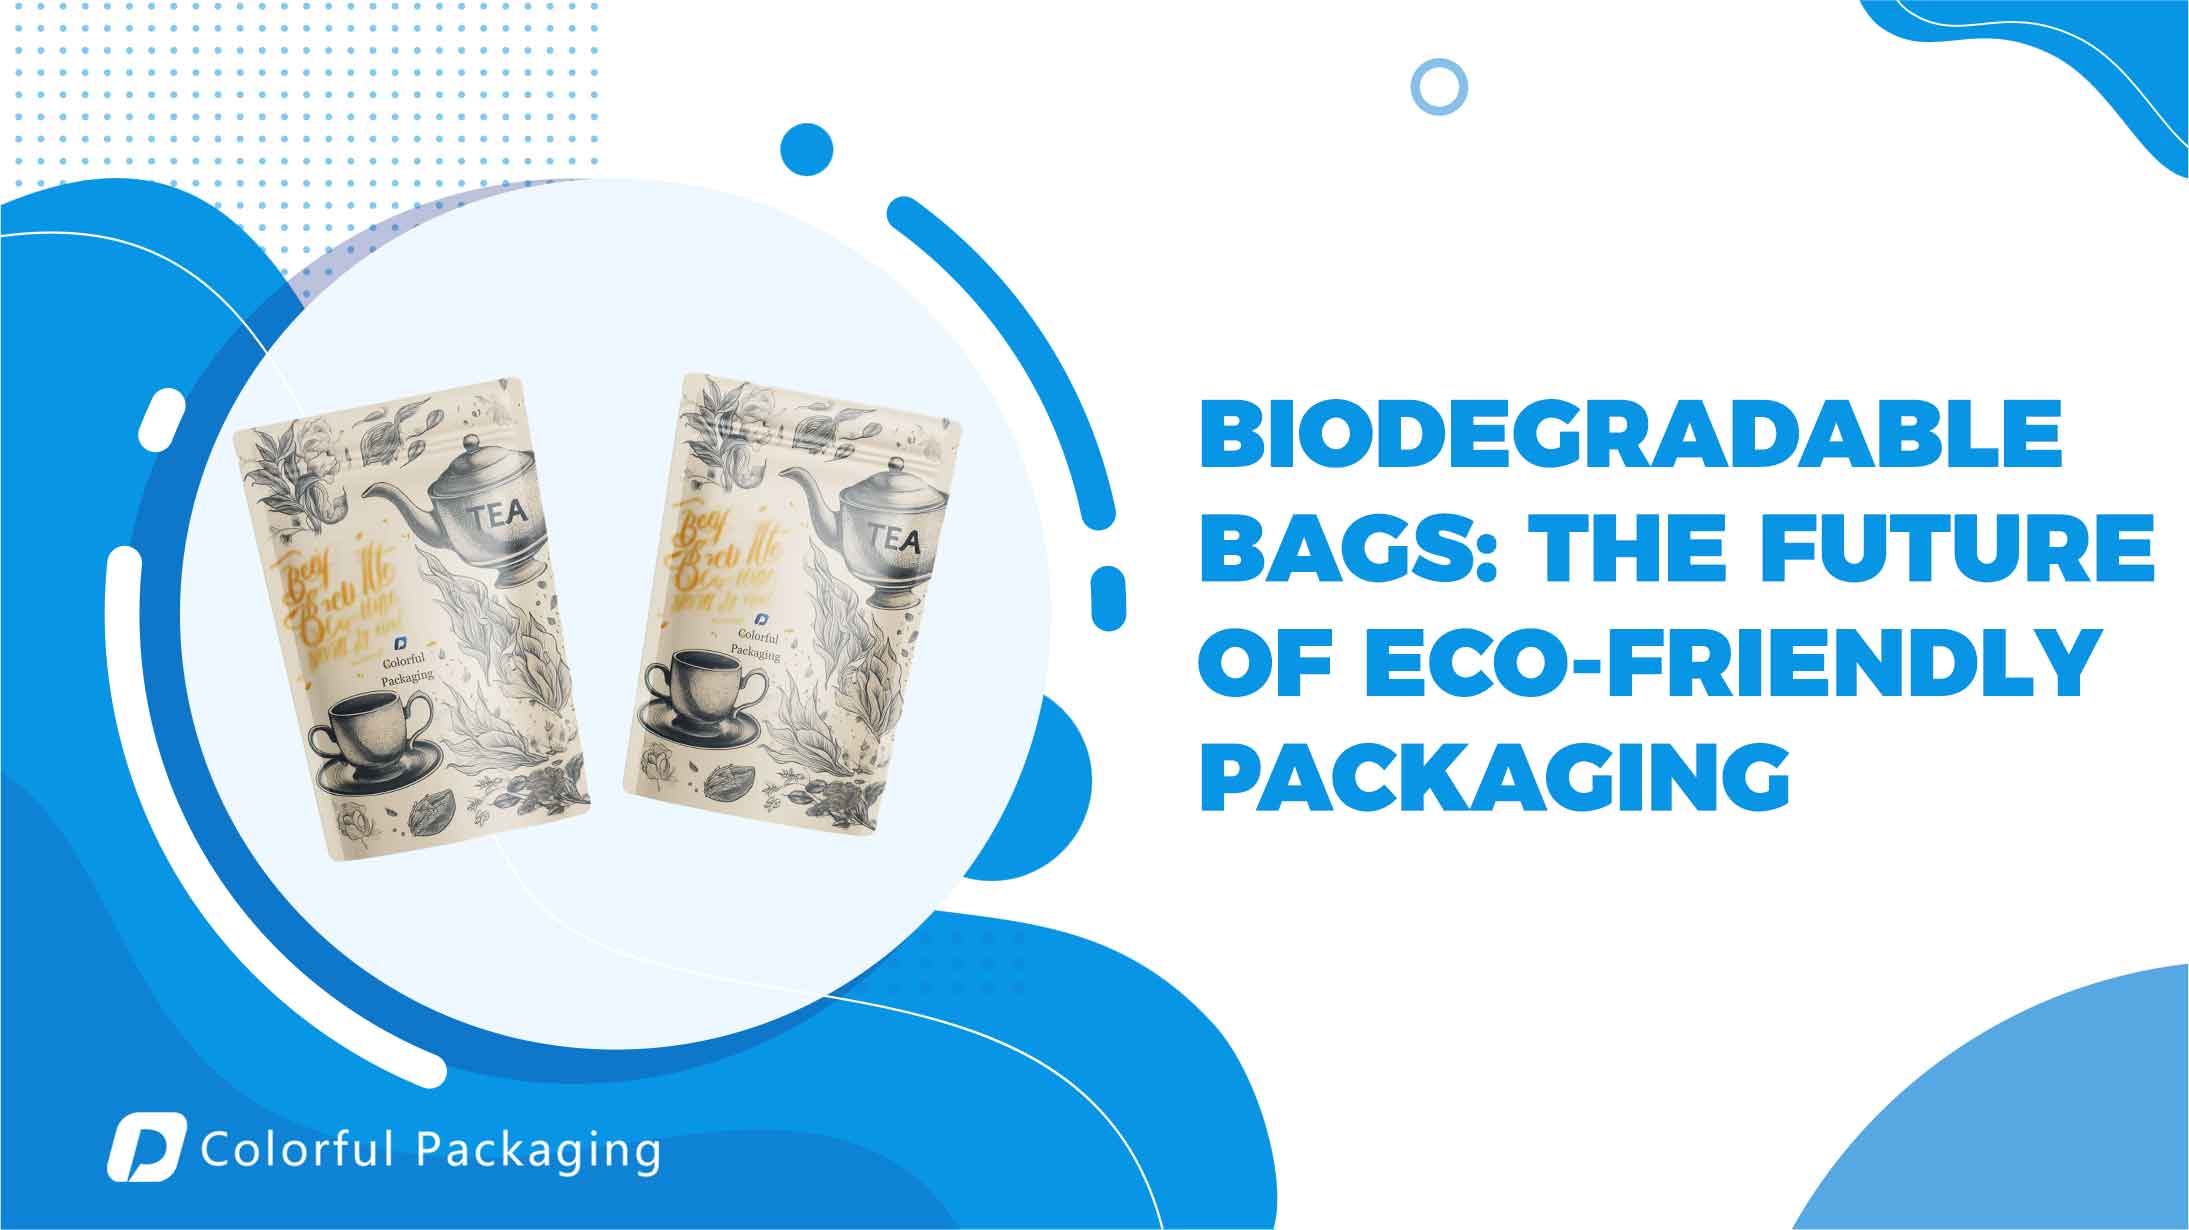 Biodegradable Bags: The Future of Eco-Friendly Packaging